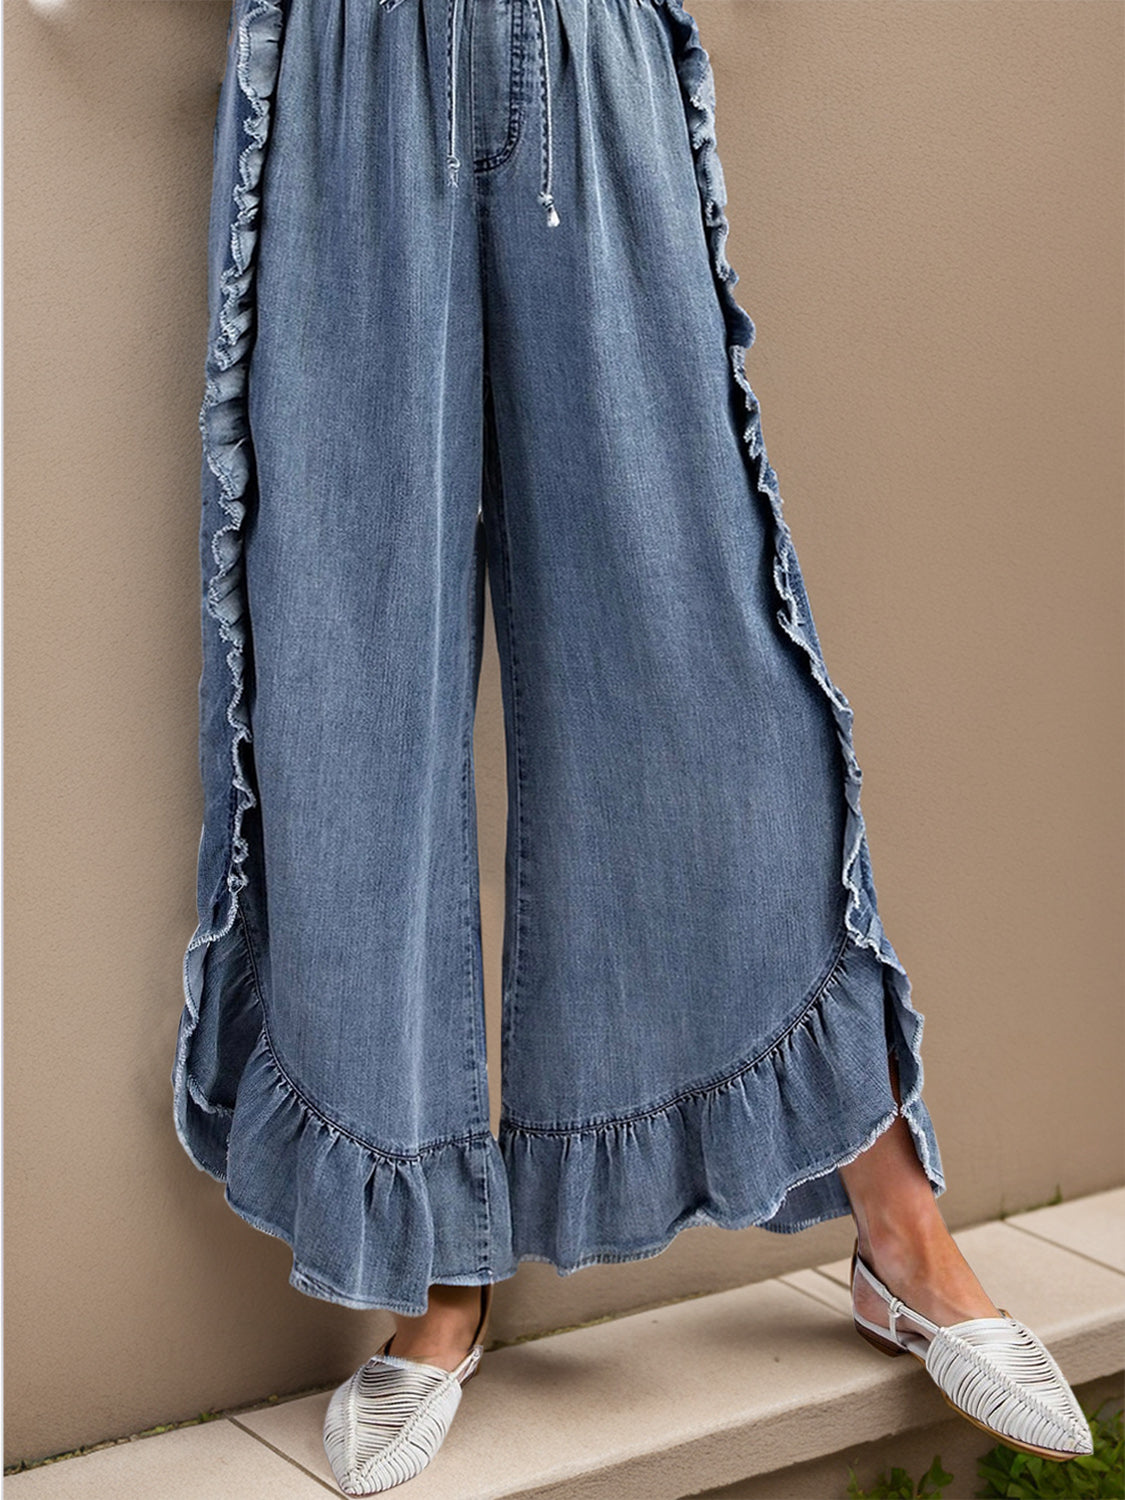 Drawstring Jeans - Wedeh's Fashion